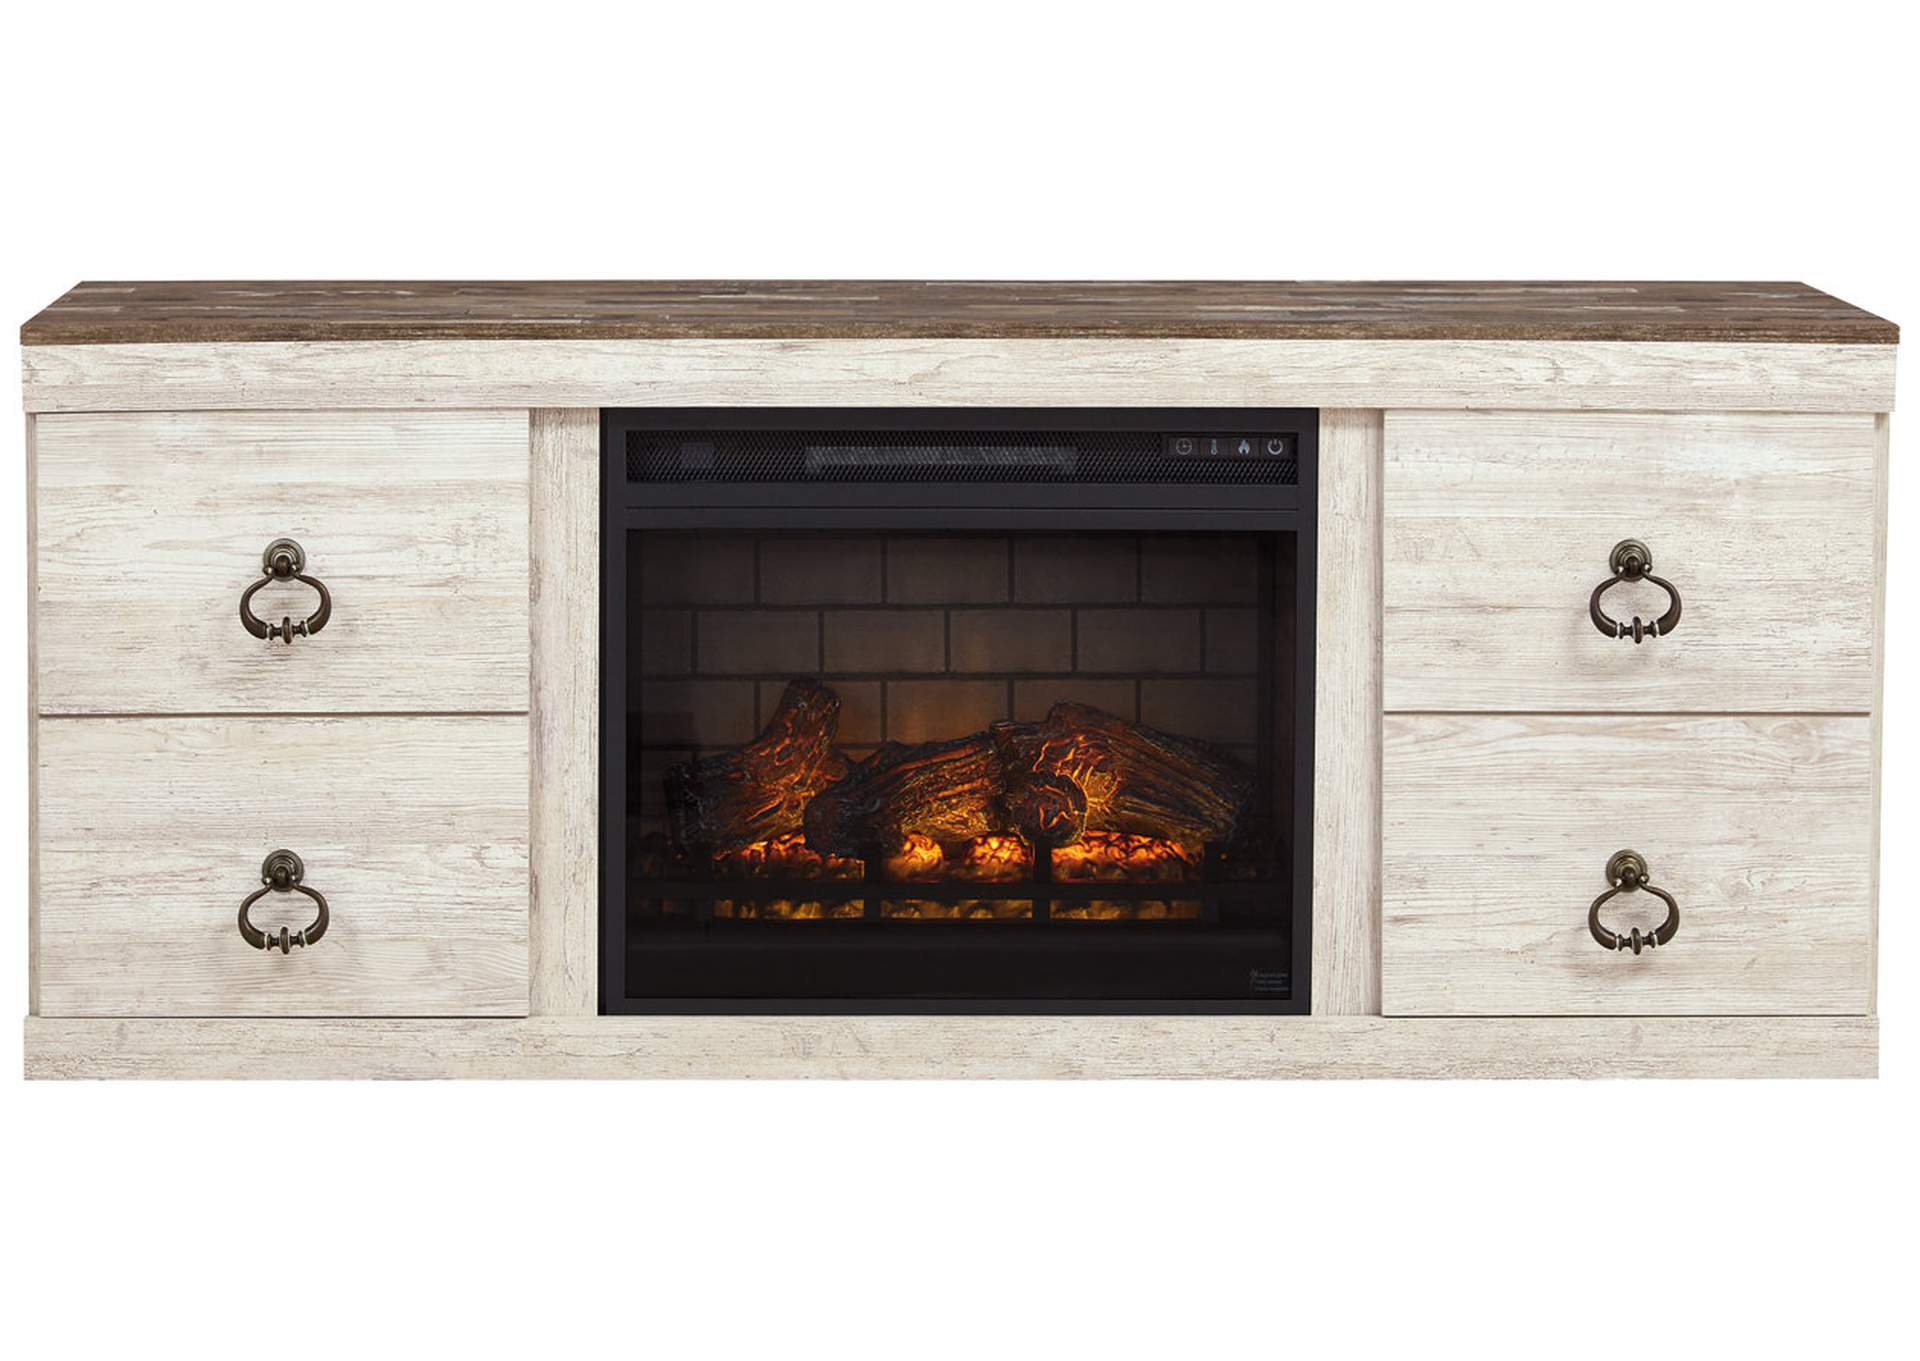 Willowton 60" TV Stand with Electric Fireplace,Signature Design By Ashley